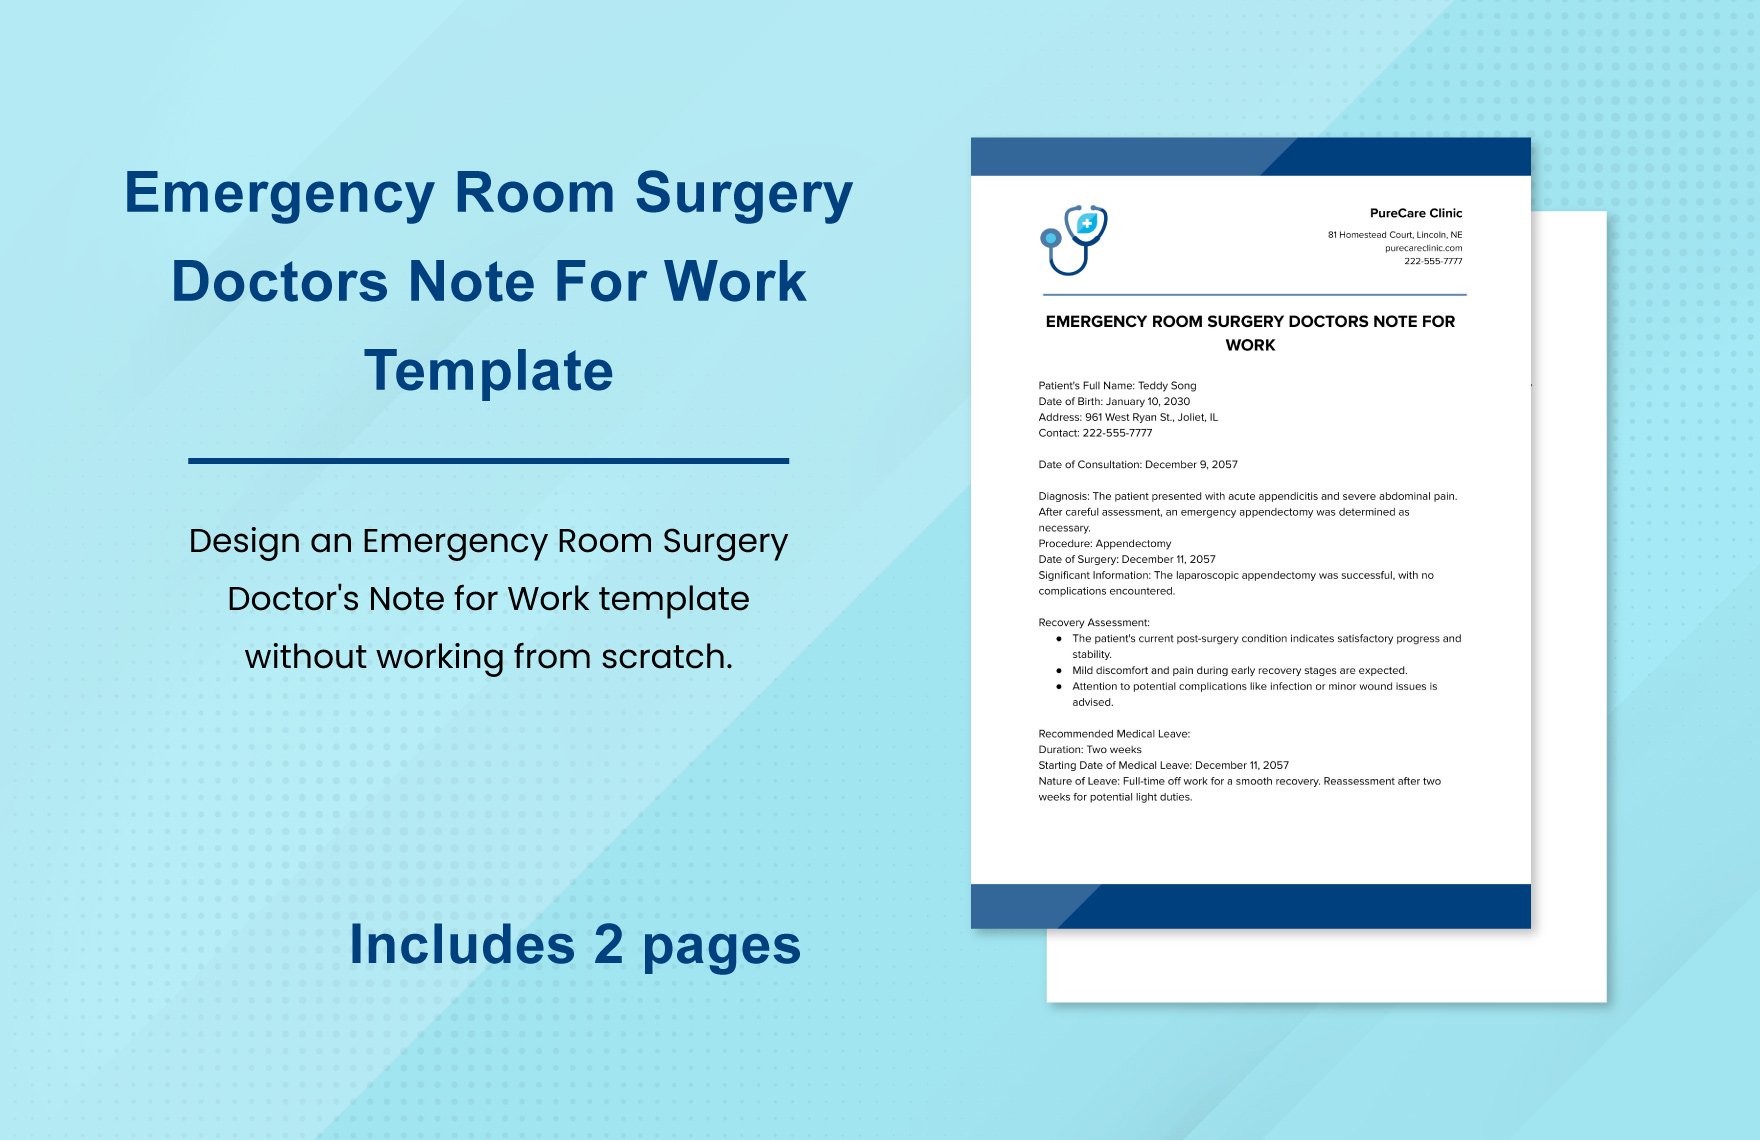 Emergency Room Surgery Doctor's Note for Work Template